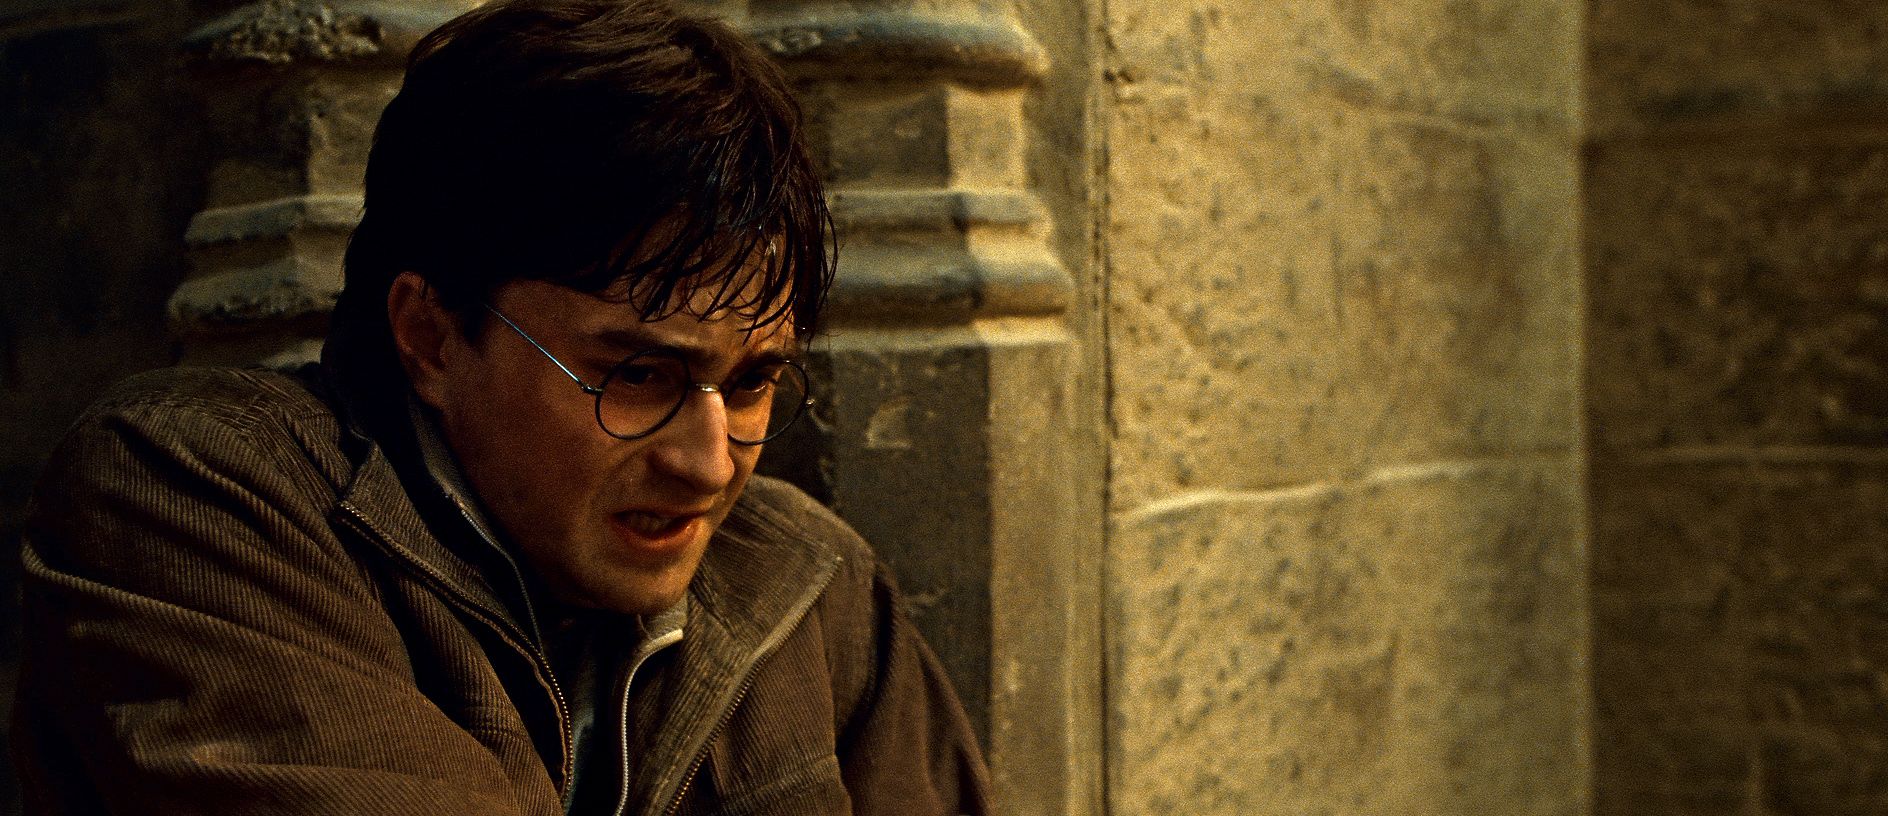 Harry Potter and the Deathly Hallows - Part 2 Photo #5